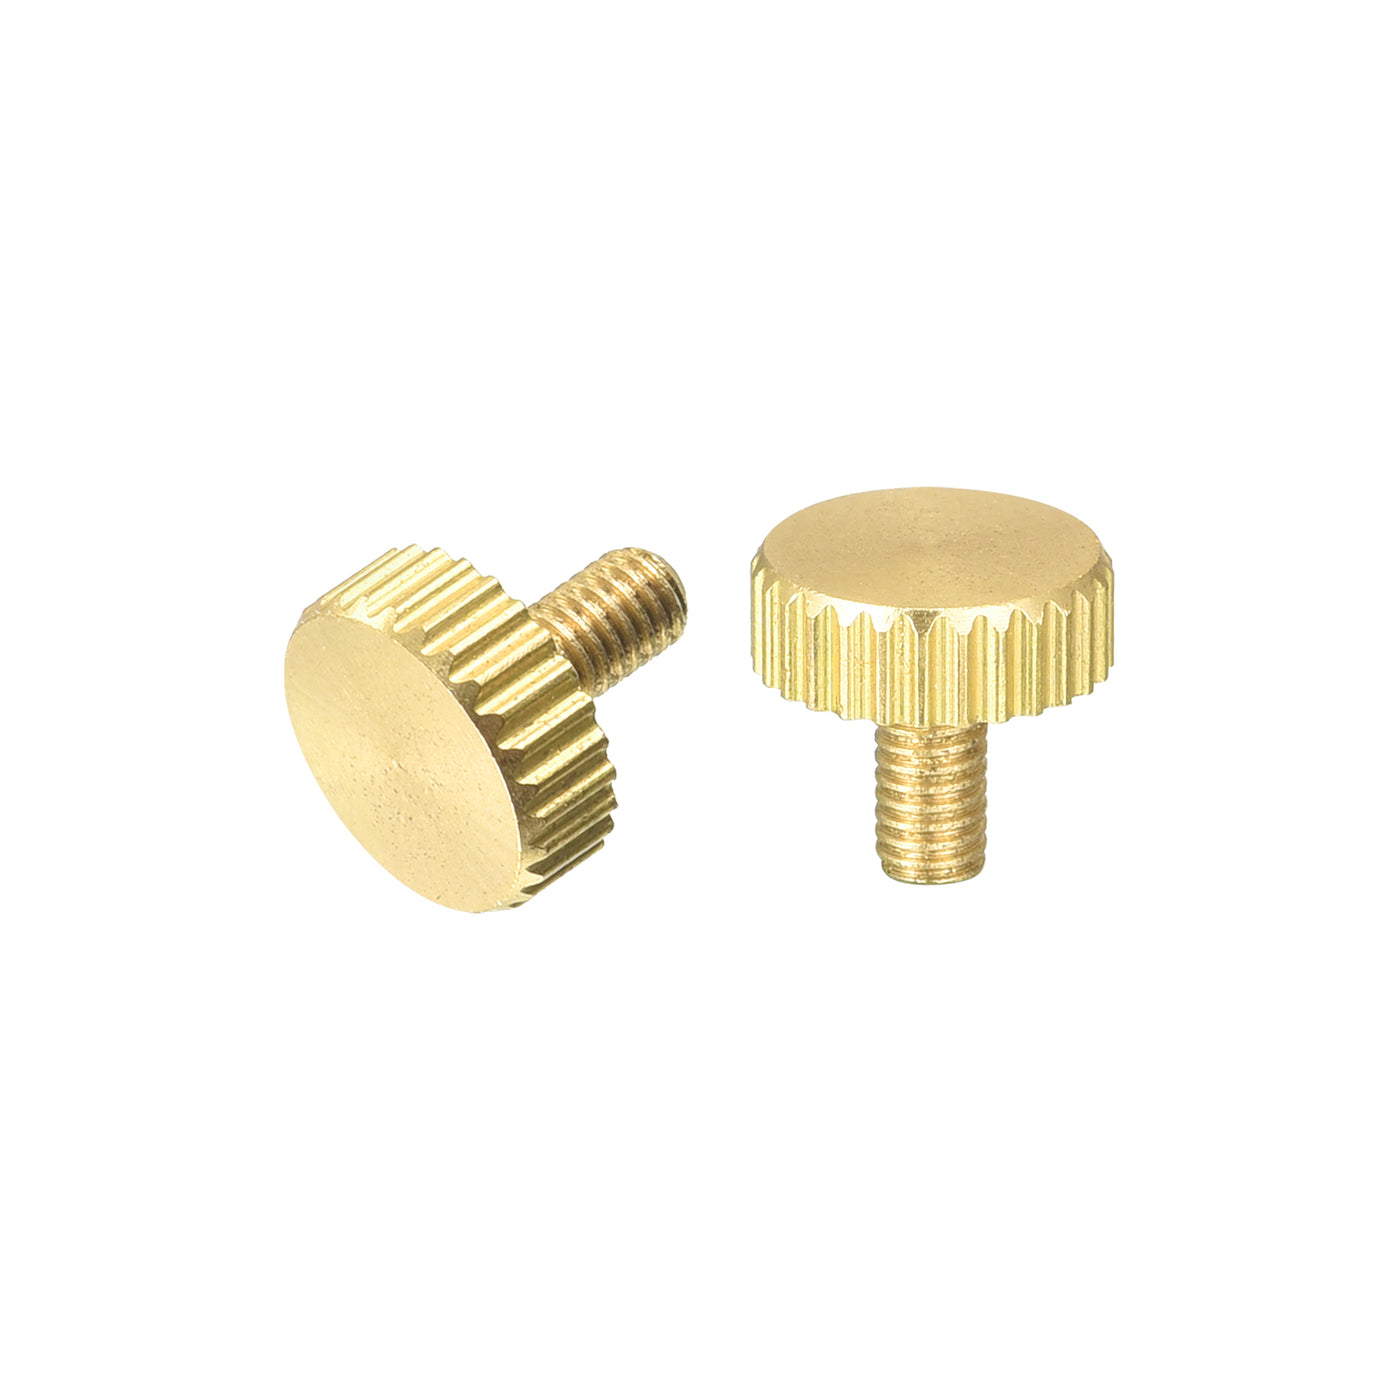 uxcell Uxcell Knurled Thumb Screws, M3x6mm Flat Brass Bolts Grip Knobs Fasteners for PC, Electronic, Mechanical 2Pcs